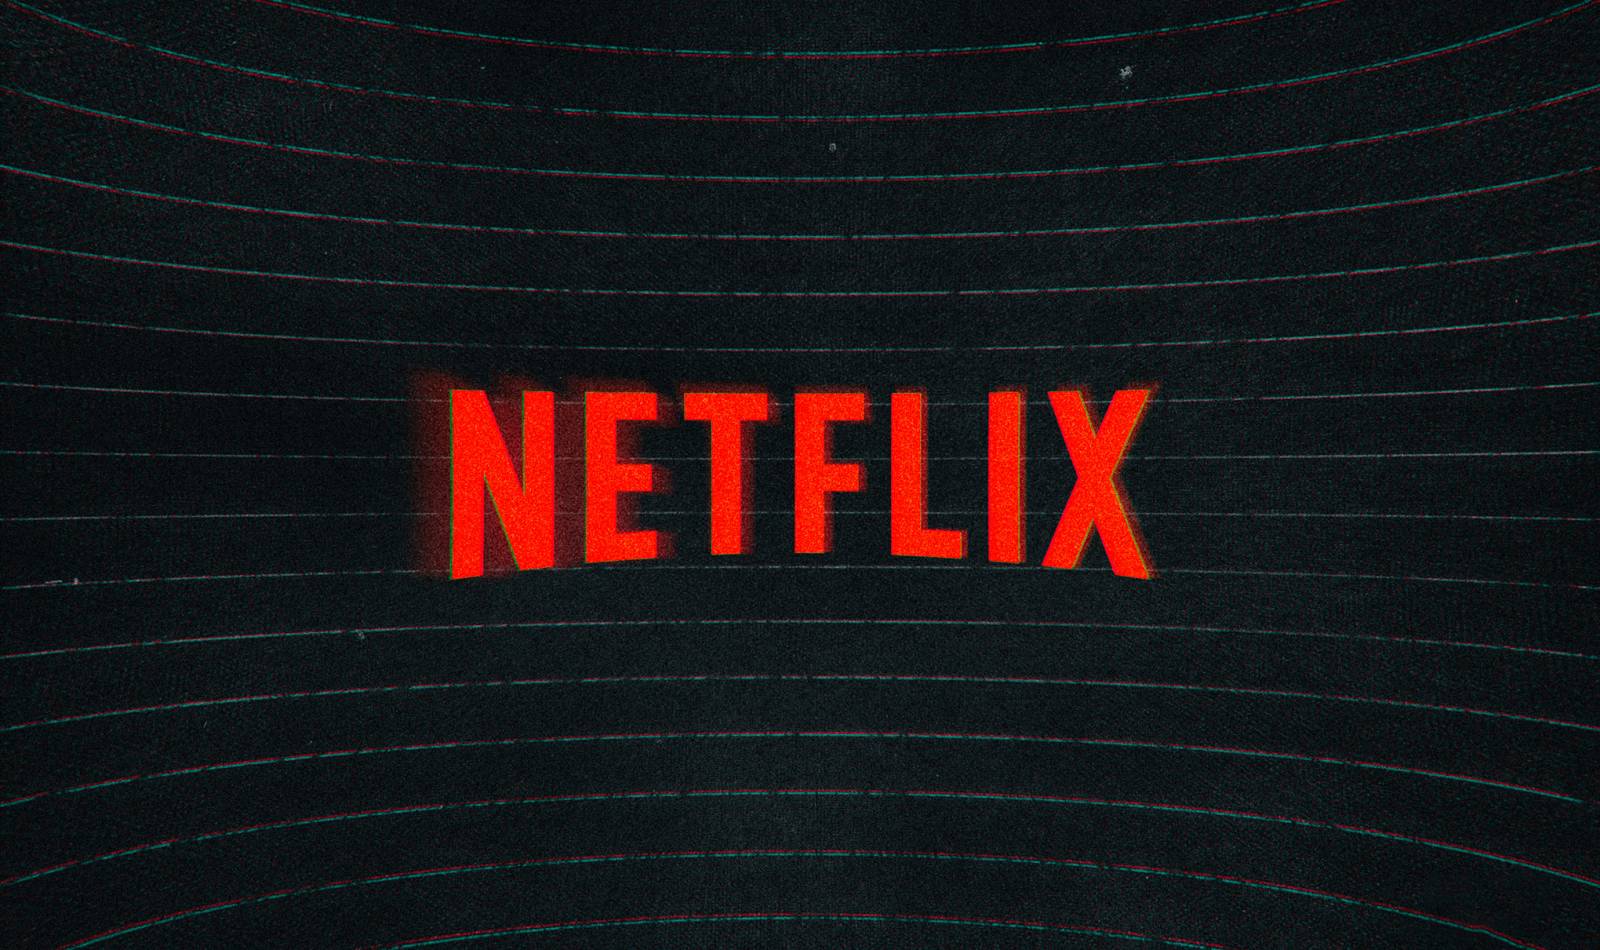 Netflix picture-in-picture